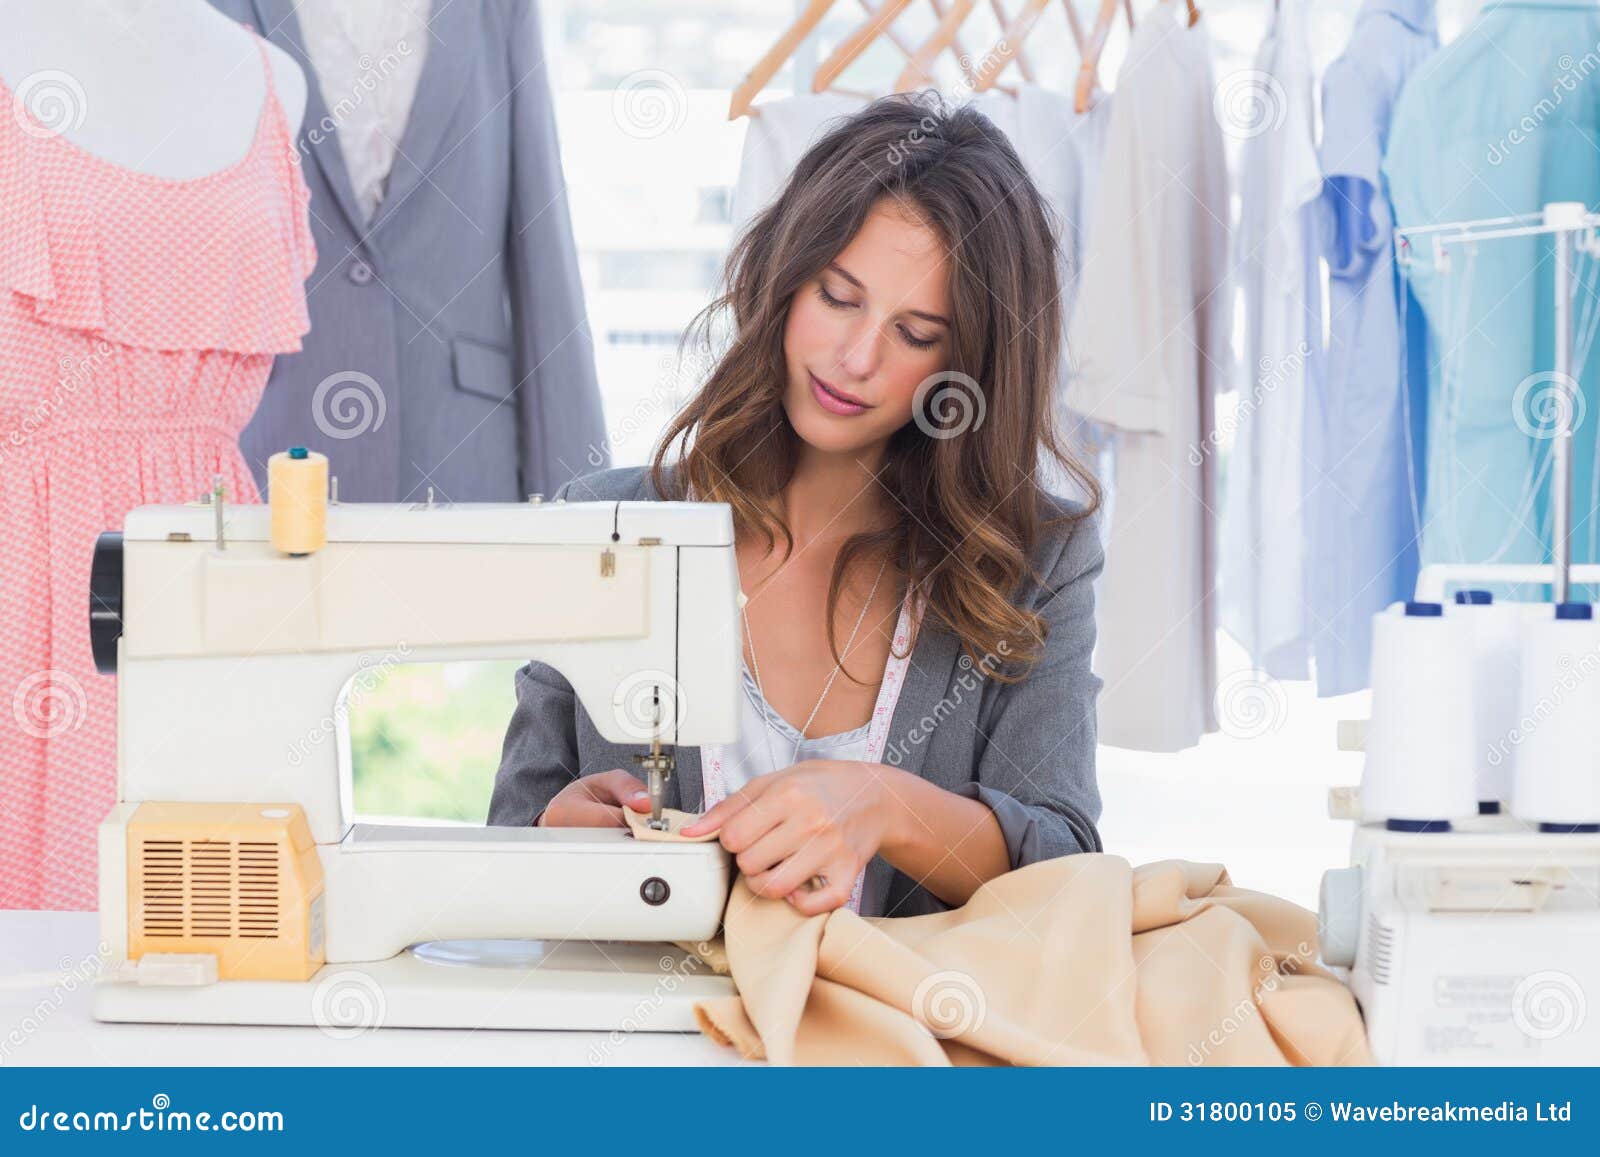 Fashion designer sewing stock image. Image of clothes - 31800105